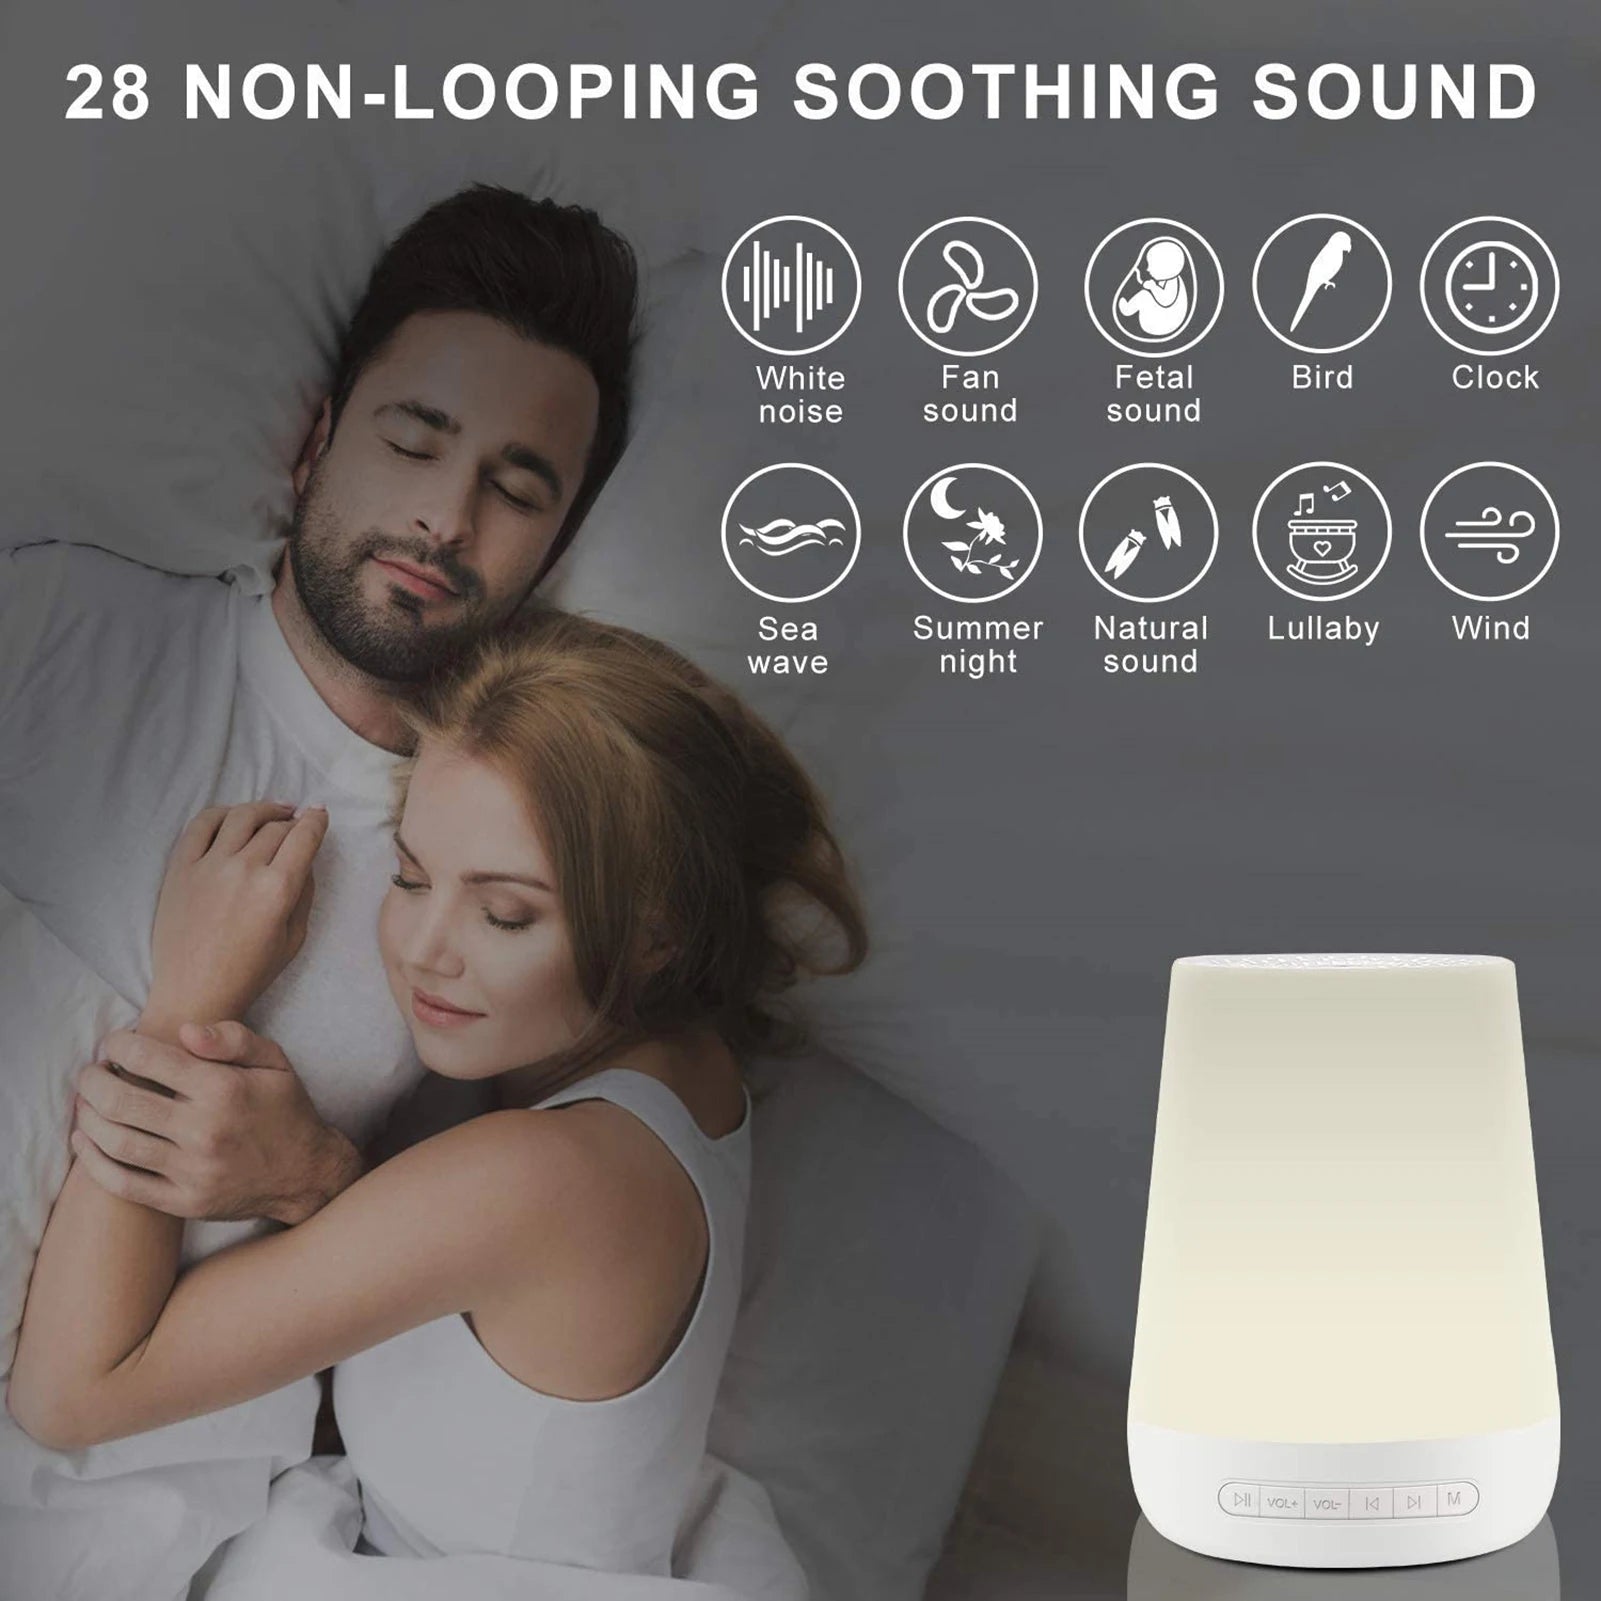 A compact and portable sleep sound machine in elegant white color, designed to aid in deep sleep for babies and adults. Features 28 soothing sounds including white noise, bird sounds, and ocean waves, as well as a rechargeable lithium battery for long operation time. Also includes a multi-color night light with adjustable brightness suitable for night-time feedings. Has customization options like a timer and volume control, and a 3.5mm headphone jack for personal use in noisy environments.